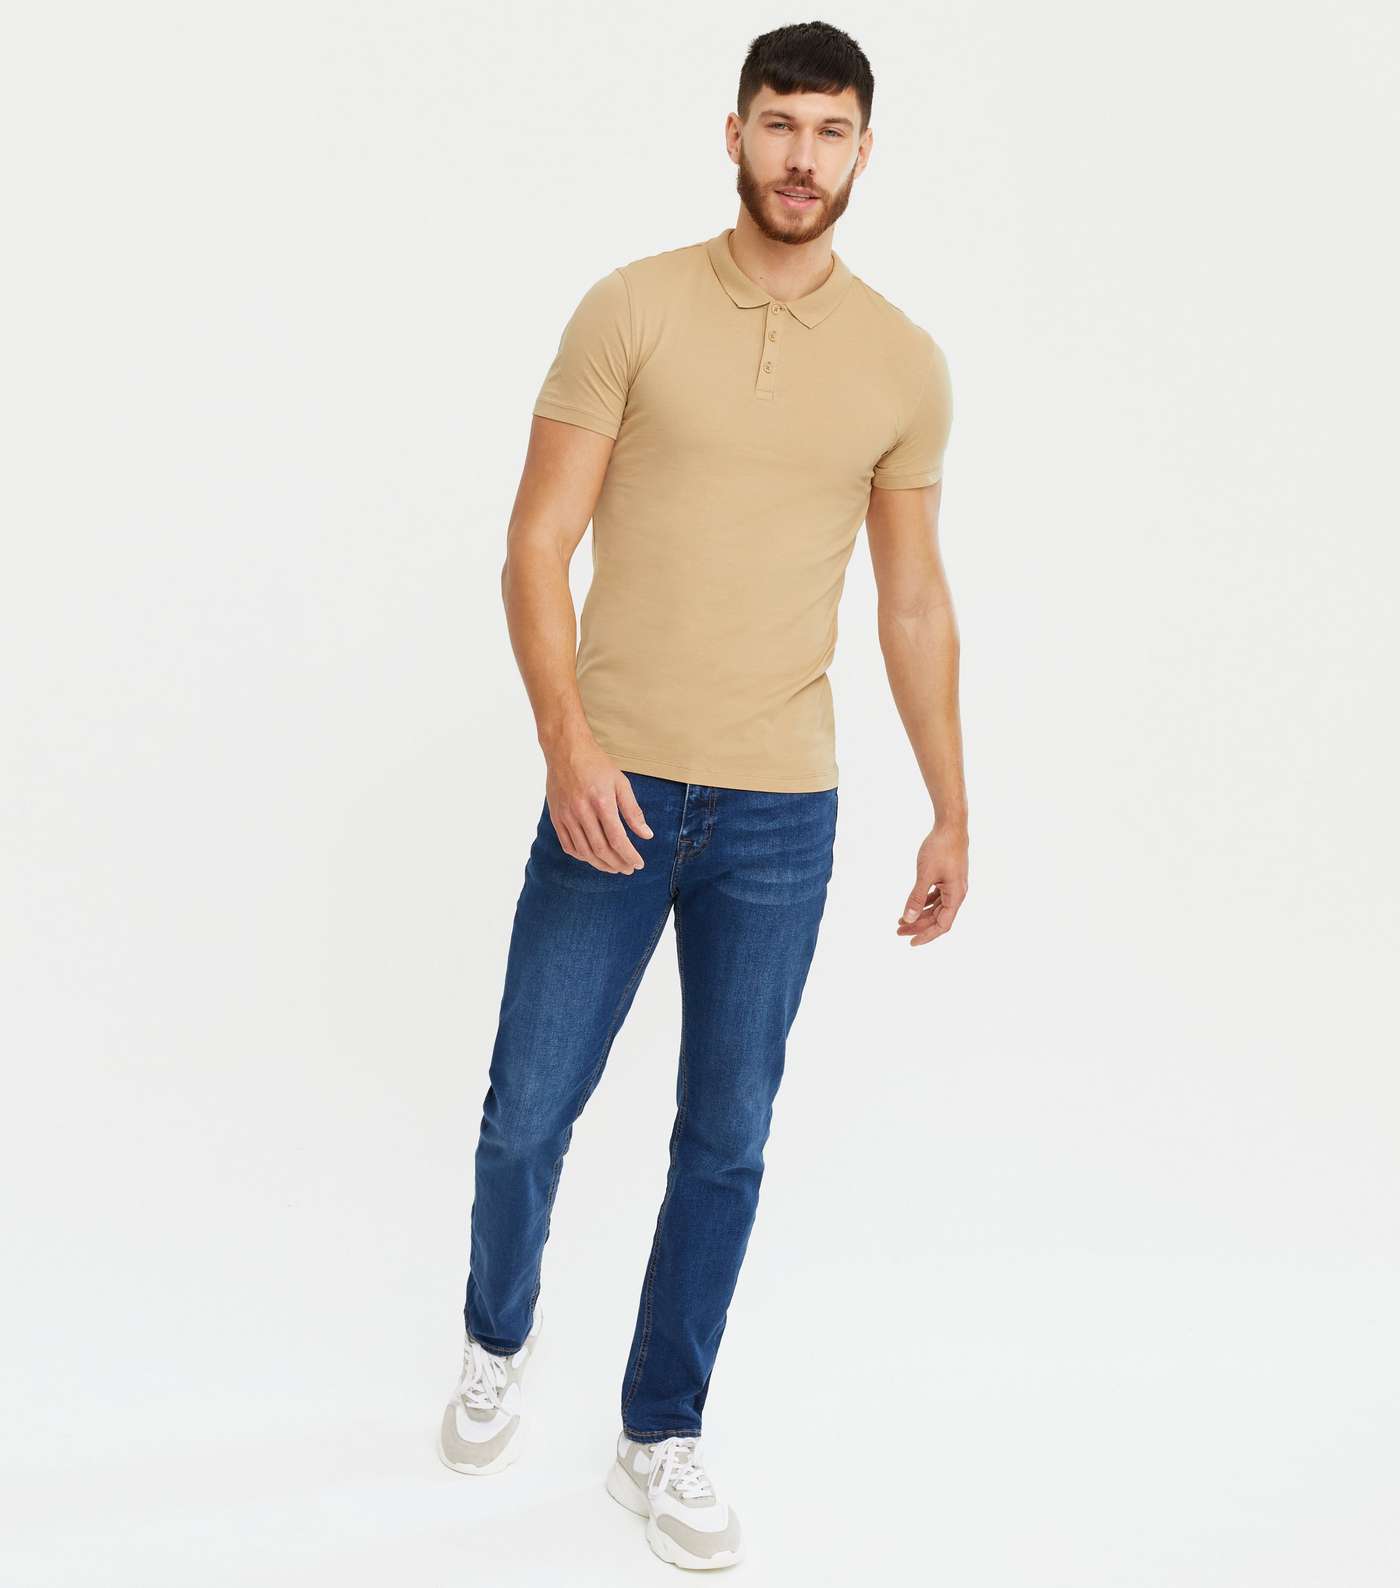 Camel Short Sleeve Muscle Fit Polo Shirt Image 2